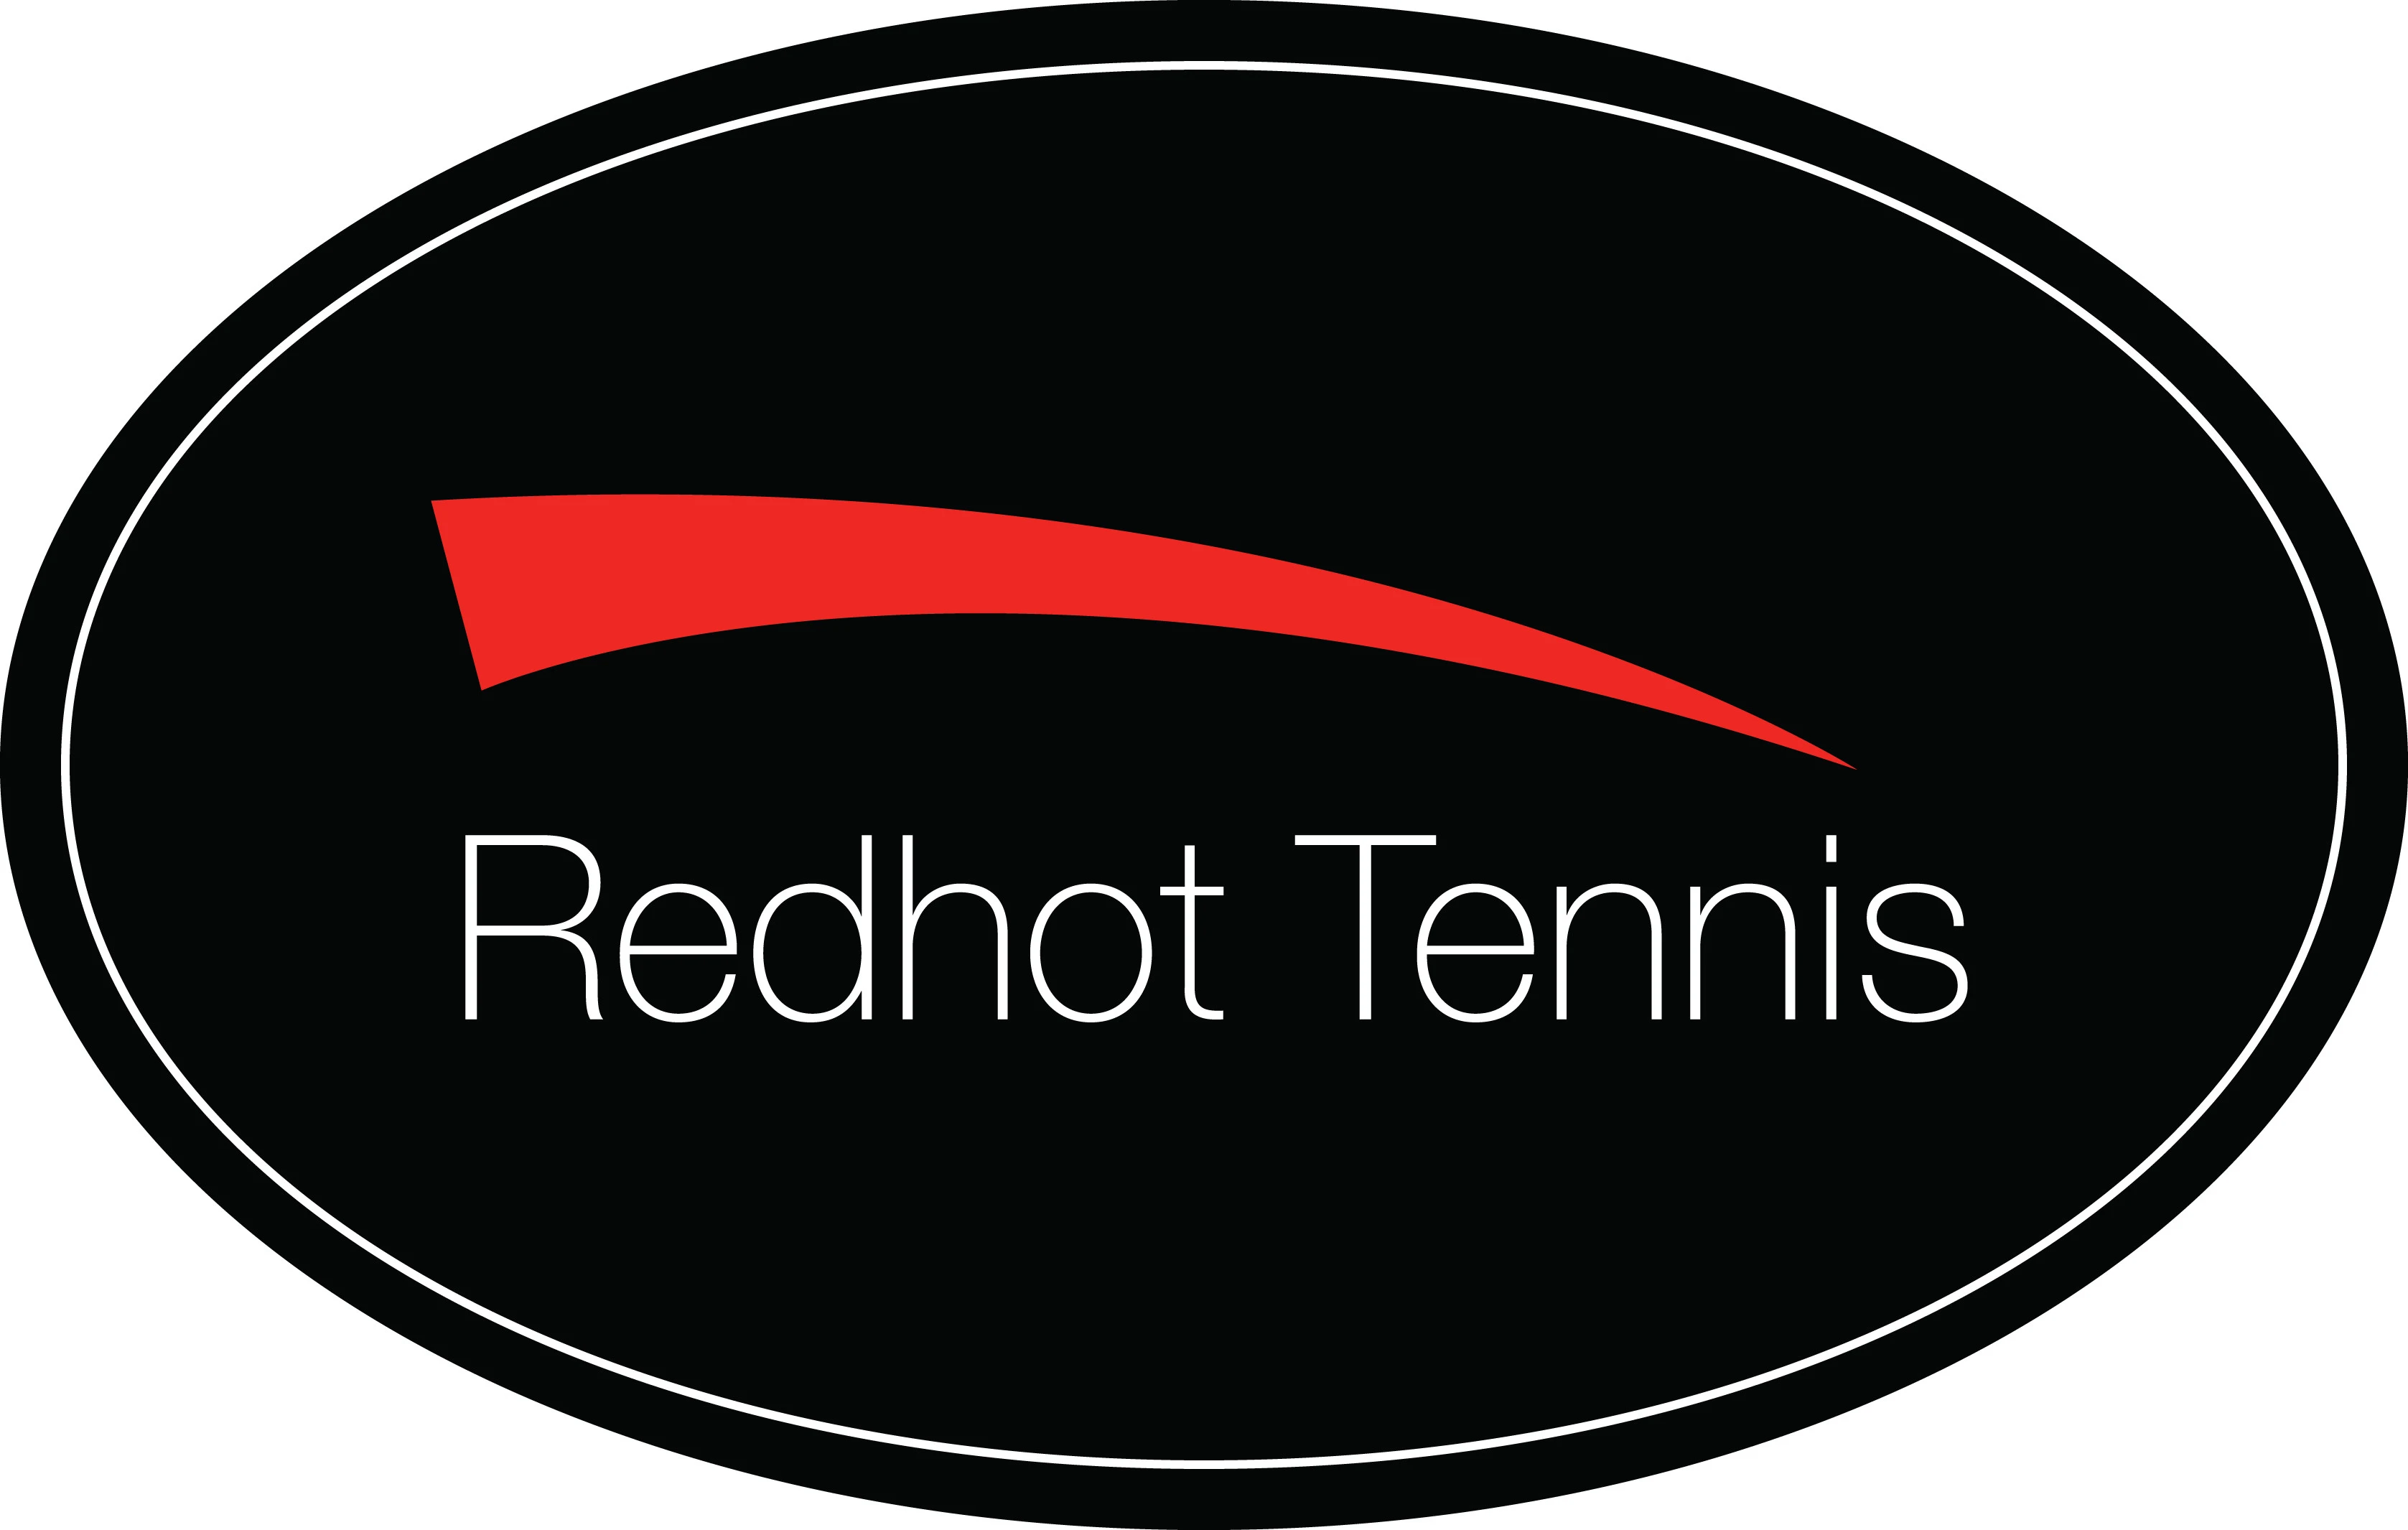 Red Hot Tennis